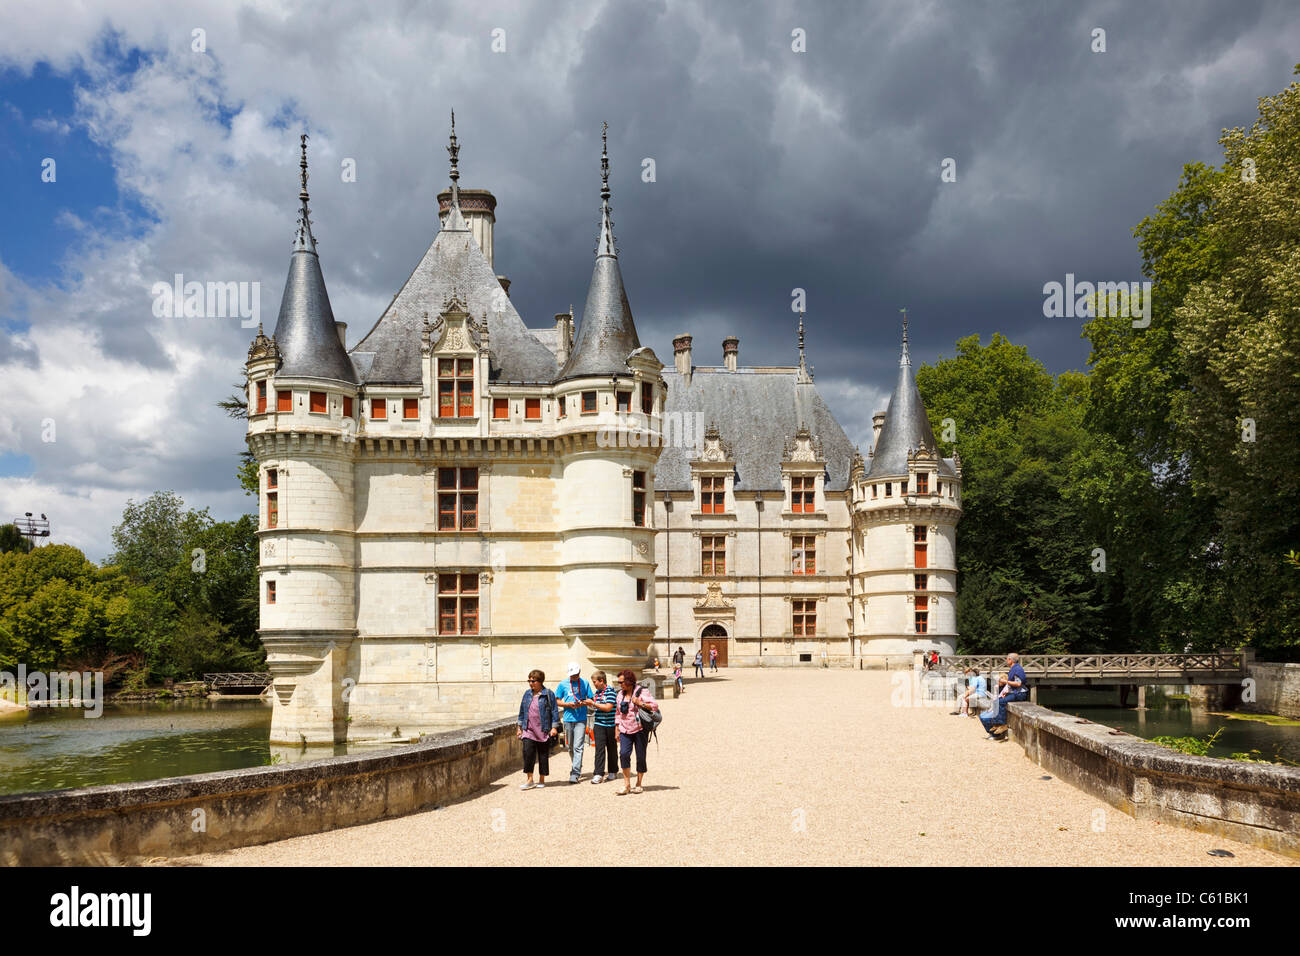 The Loire chateau at Azay le Rideau, Indre et Loire valley, France, Europe with tourists sightseeing in summer Stock Photo